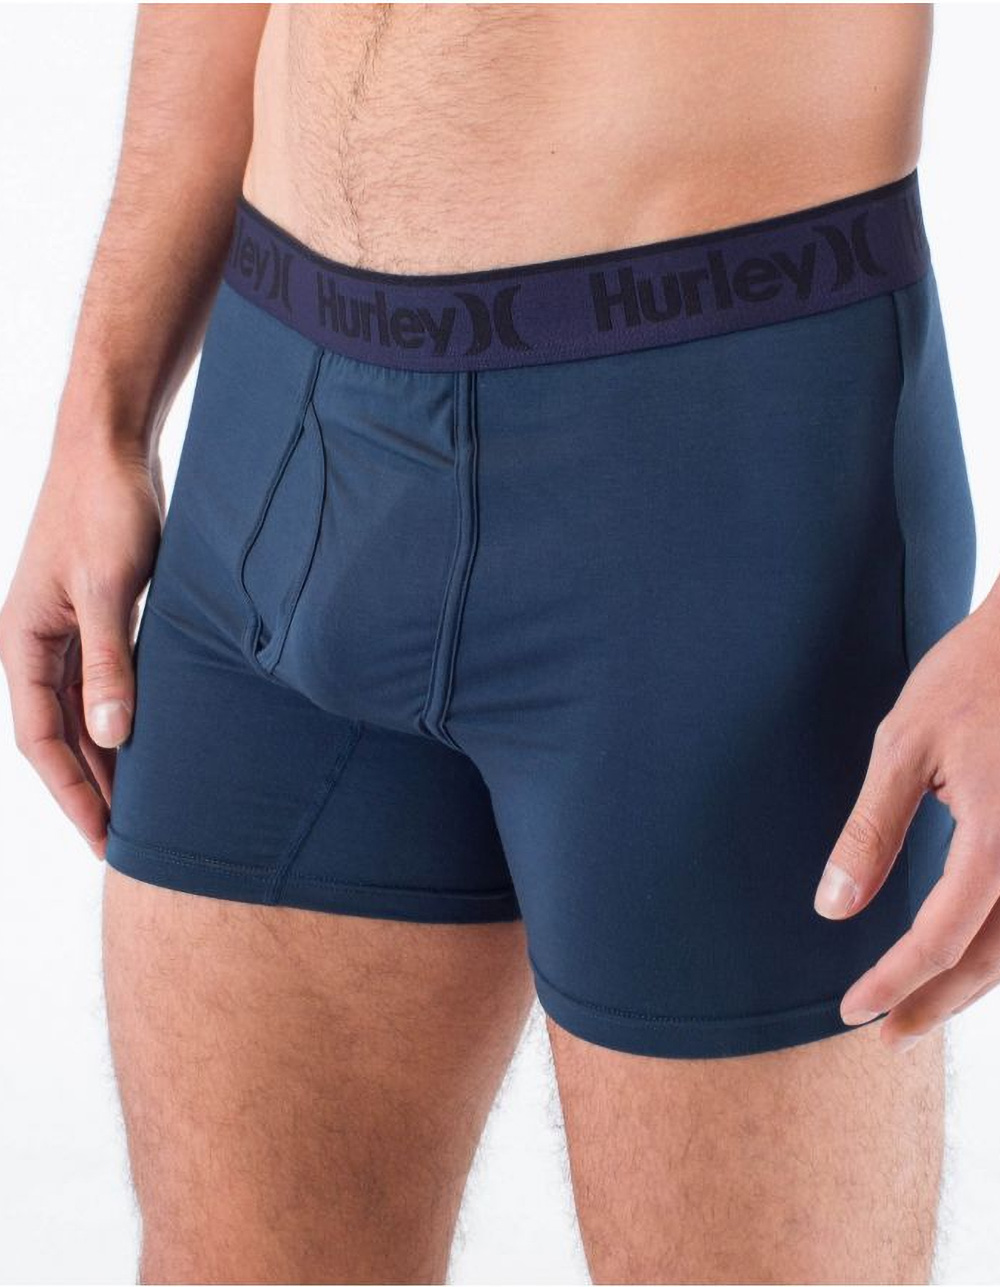 Hurley 2 Pack Of Grey & Blue Boxer Brief Shorts Men's Size Large